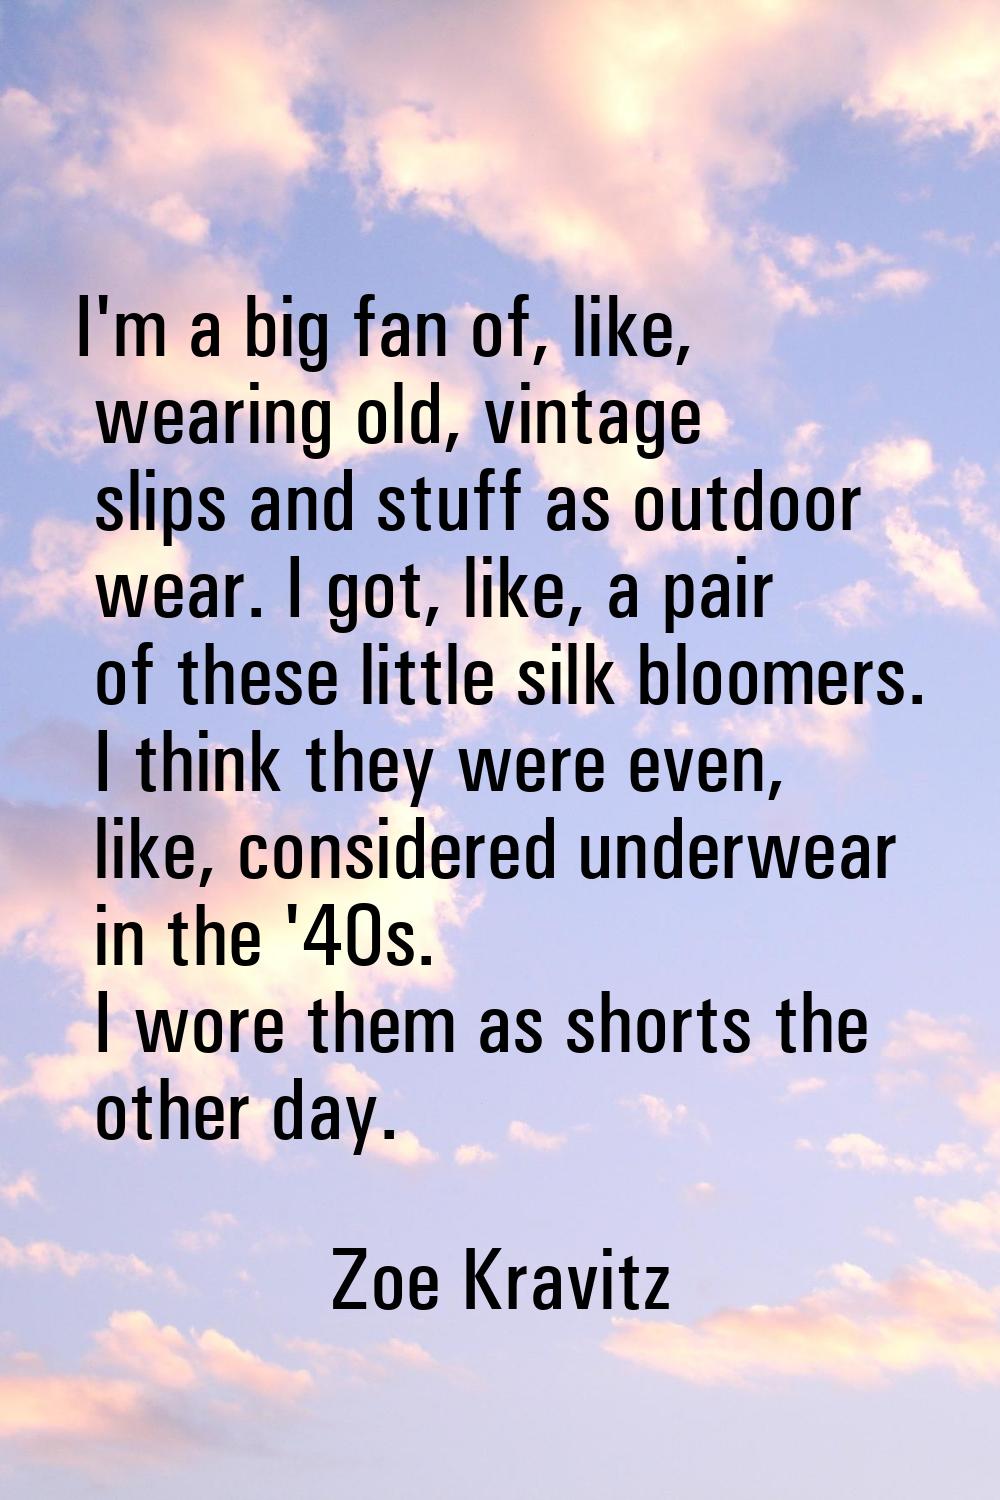 I'm a big fan of, like, wearing old, vintage slips and stuff as outdoor wear. I got, like, a pair o